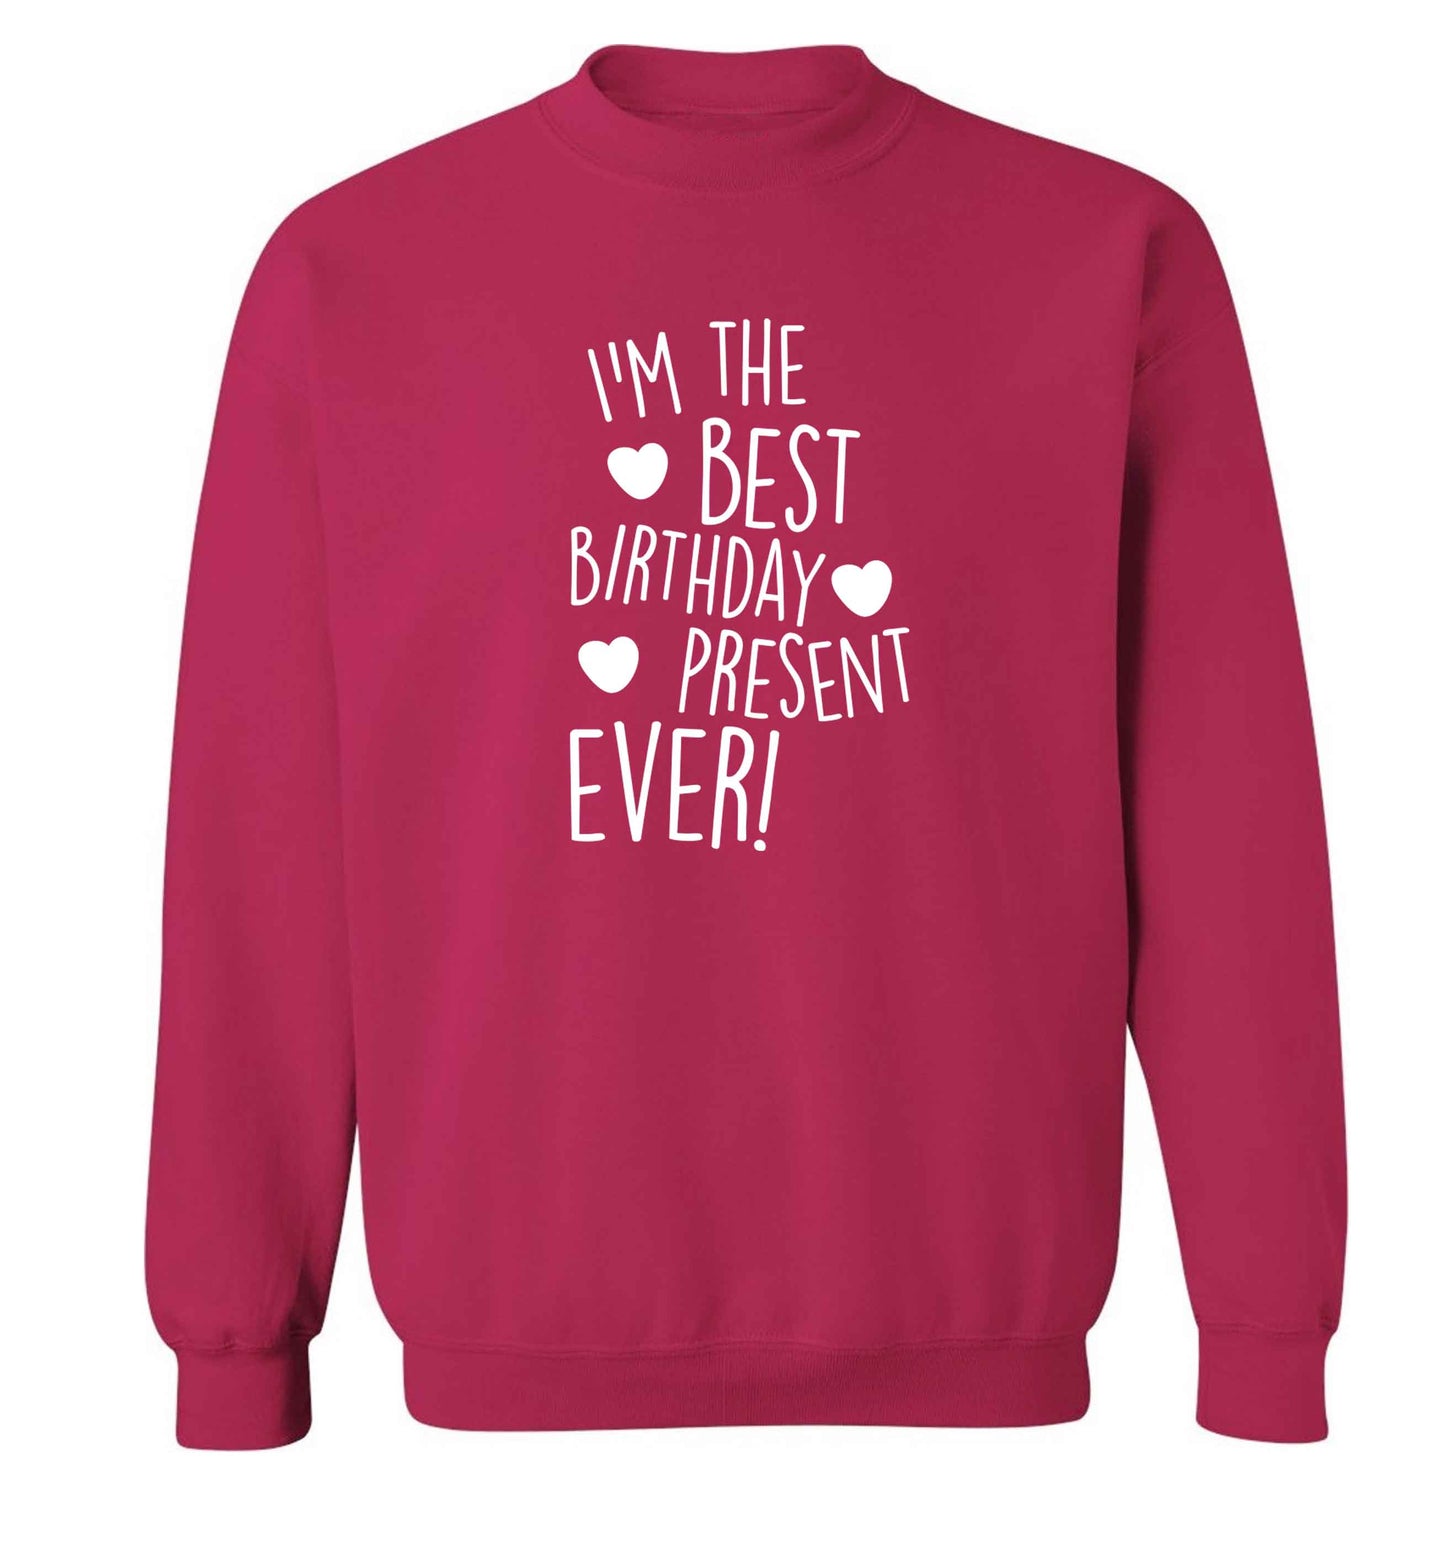 I'm the best birthday present ever adult's unisex pink sweater 2XL